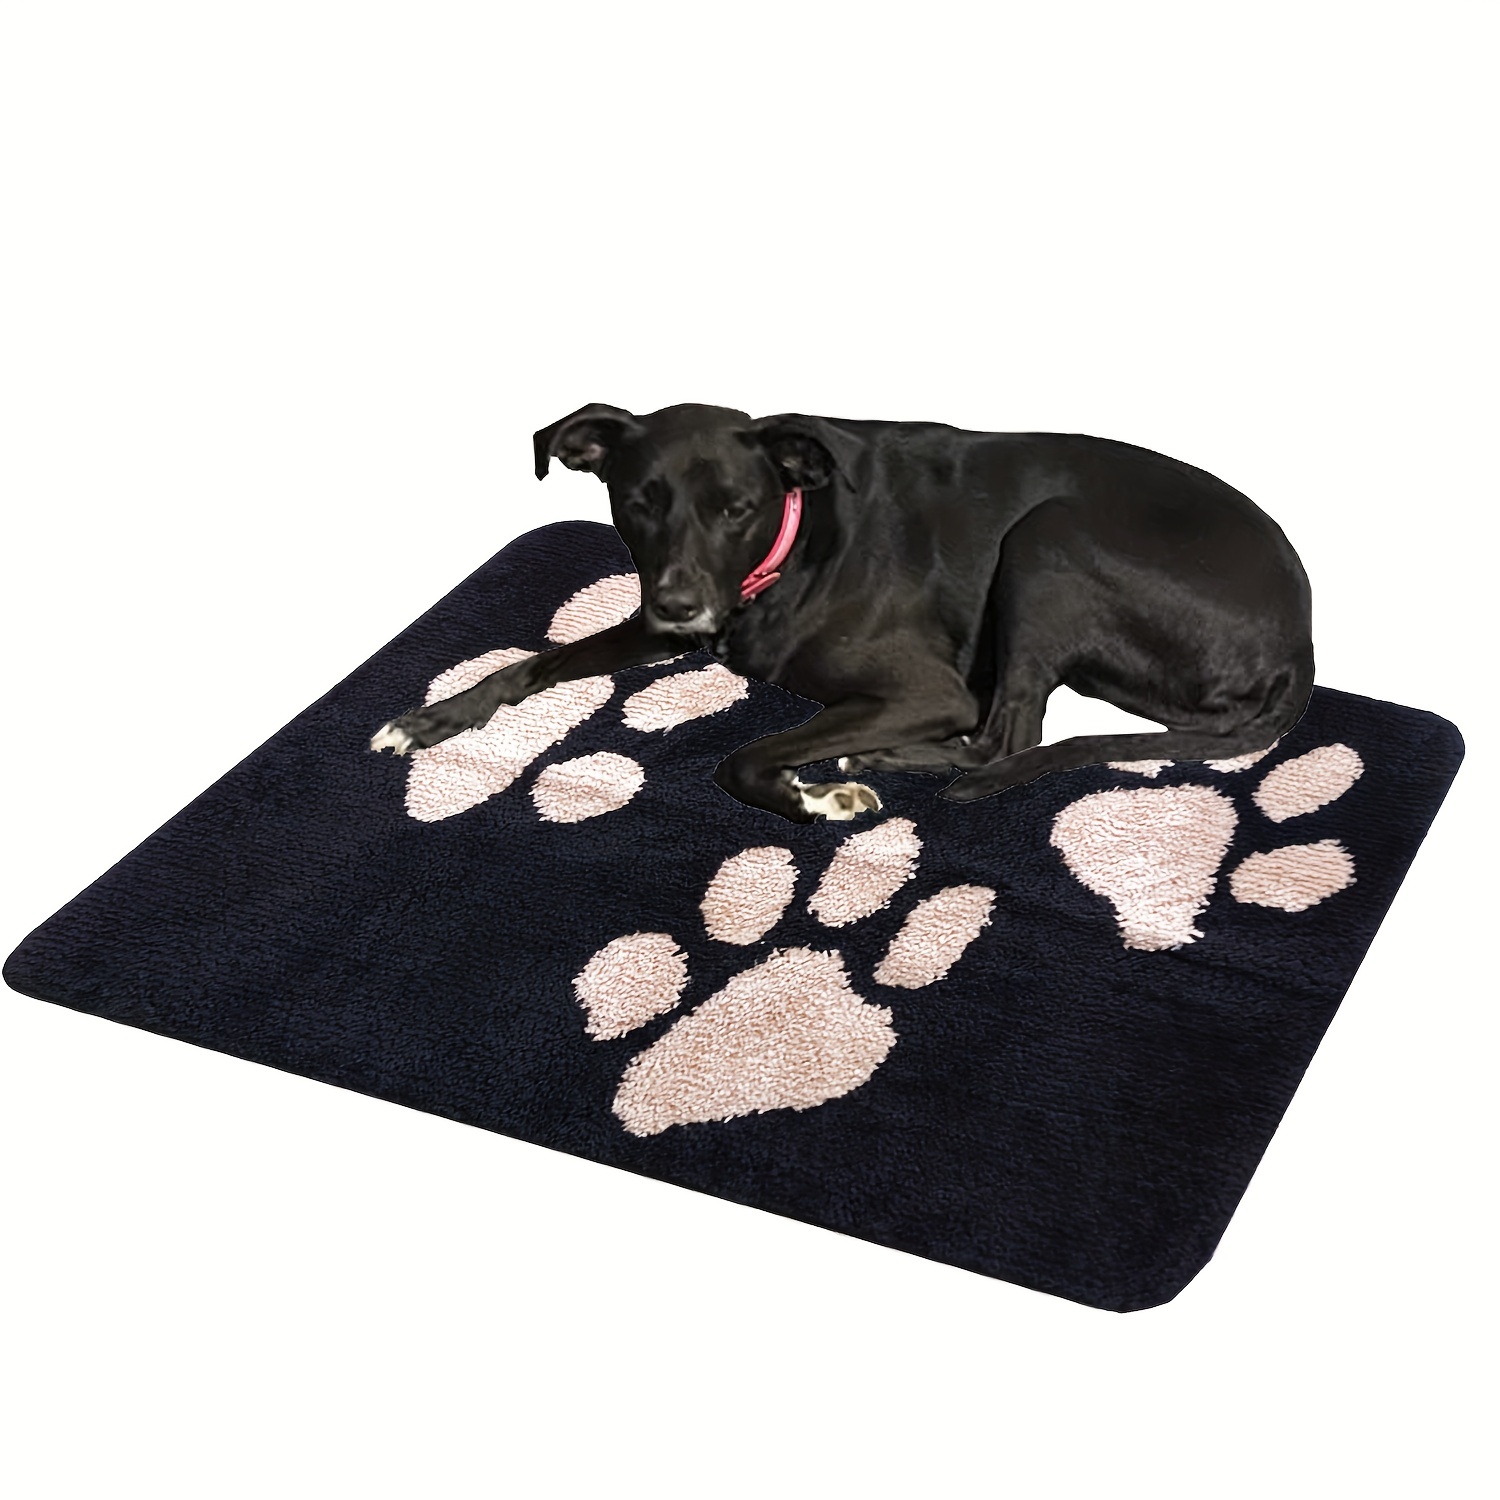 Dirt Trapper Door mat Non-Skid/Slip Machine Washable Entryway Rug, Dog Door  Mat, Super Absorbent Welcome mat for Muddy Wet Shoes and Paws